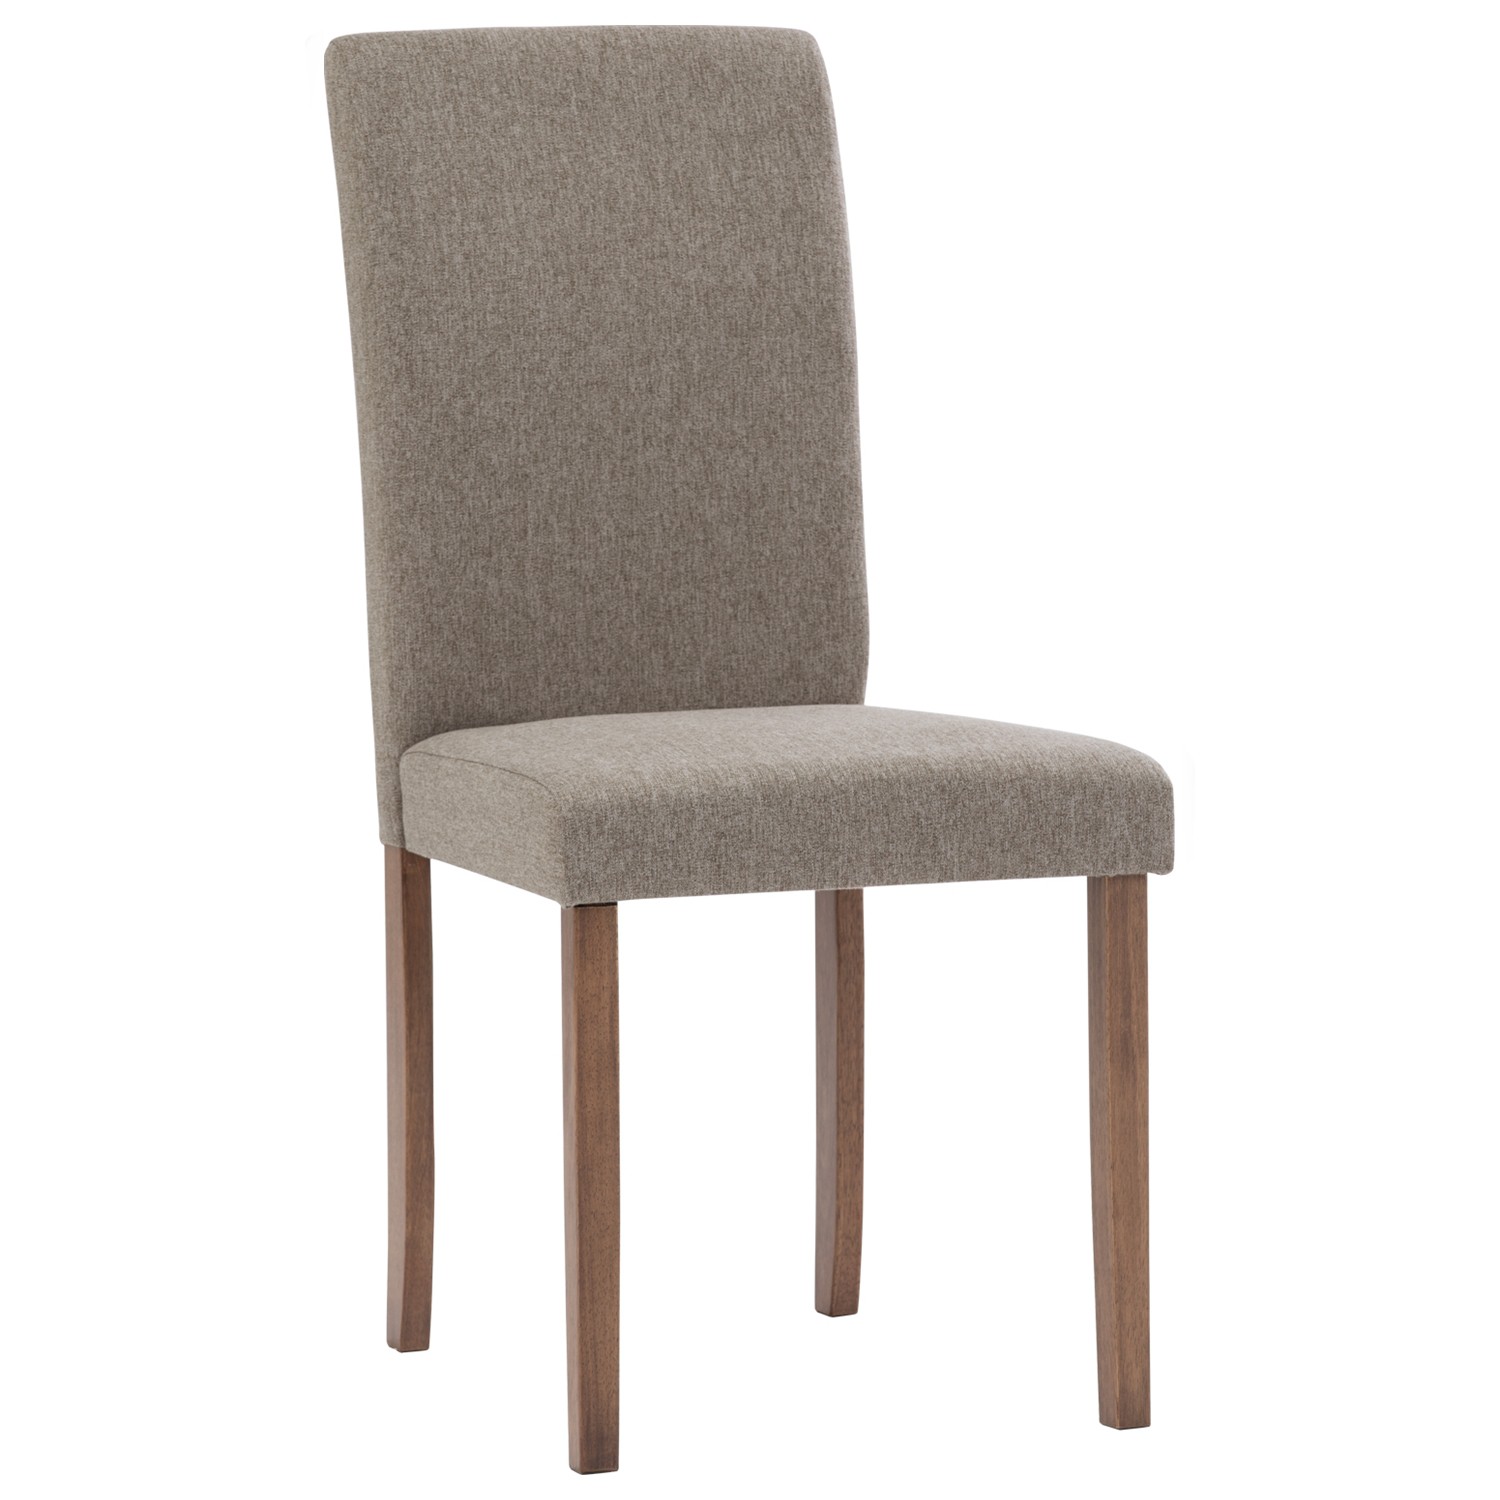 LENORE DINING CHAIR 109/6513